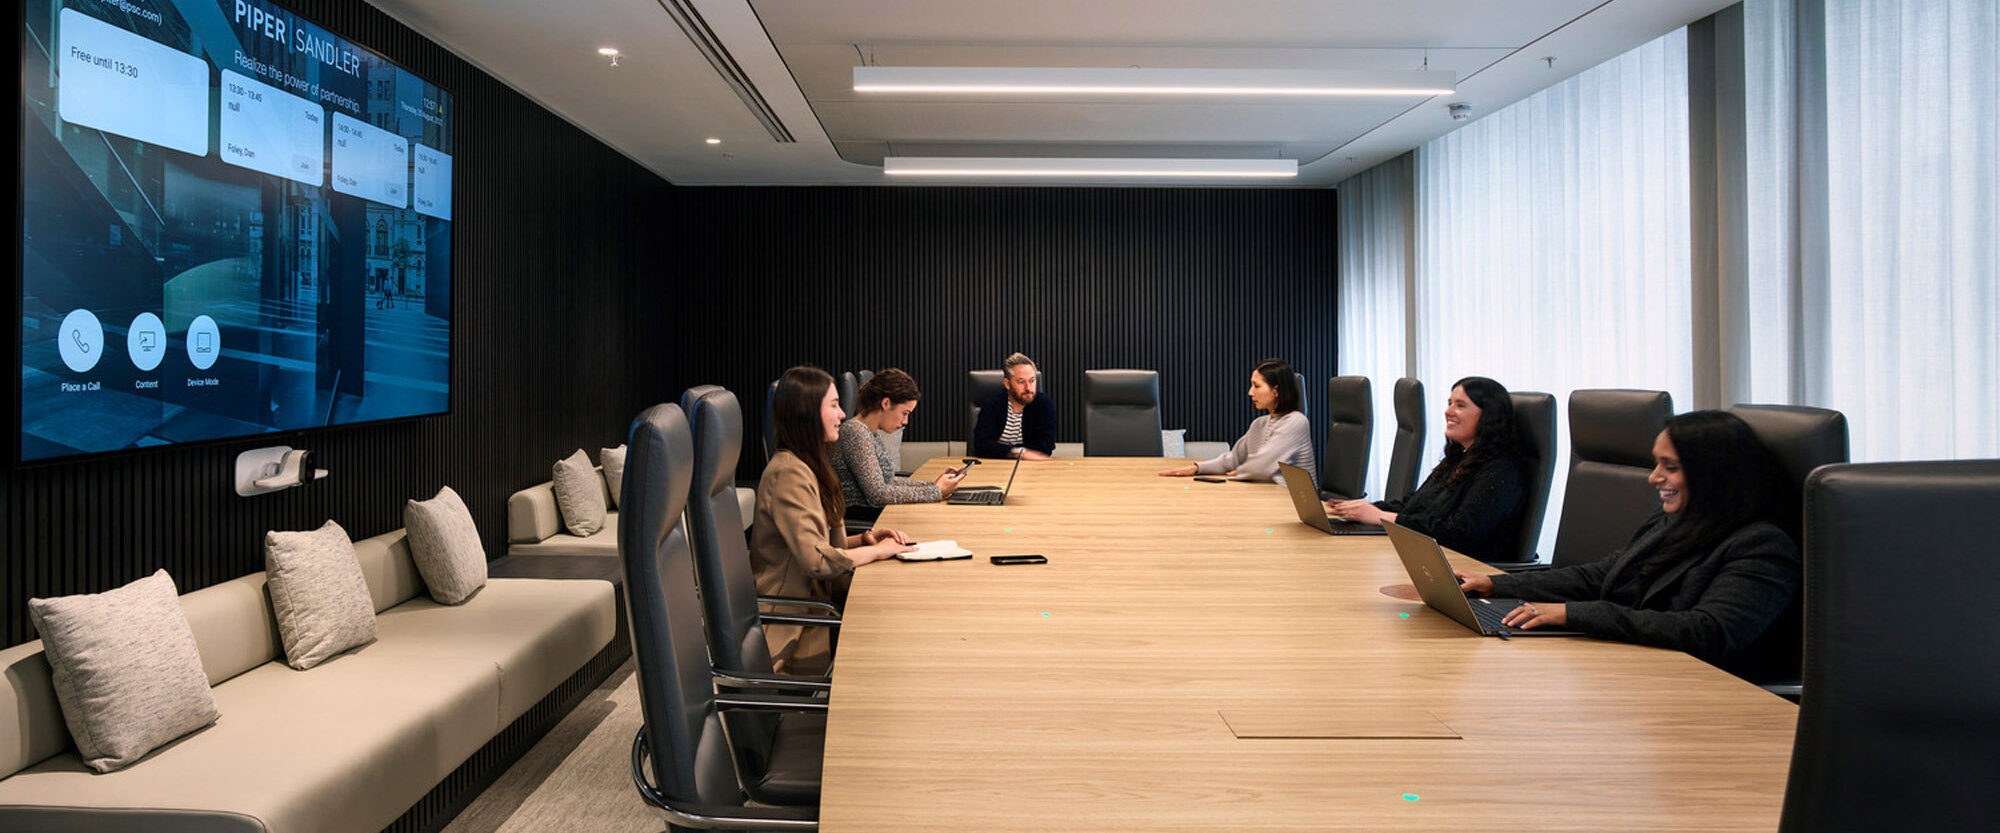 Modern boardroom with a sleek, wooden conference table, surrounded by ergonomic chairs. A large digital screen displays a presentation, while natural light filters through the windows, complementing the room's recessed and strip lighting.